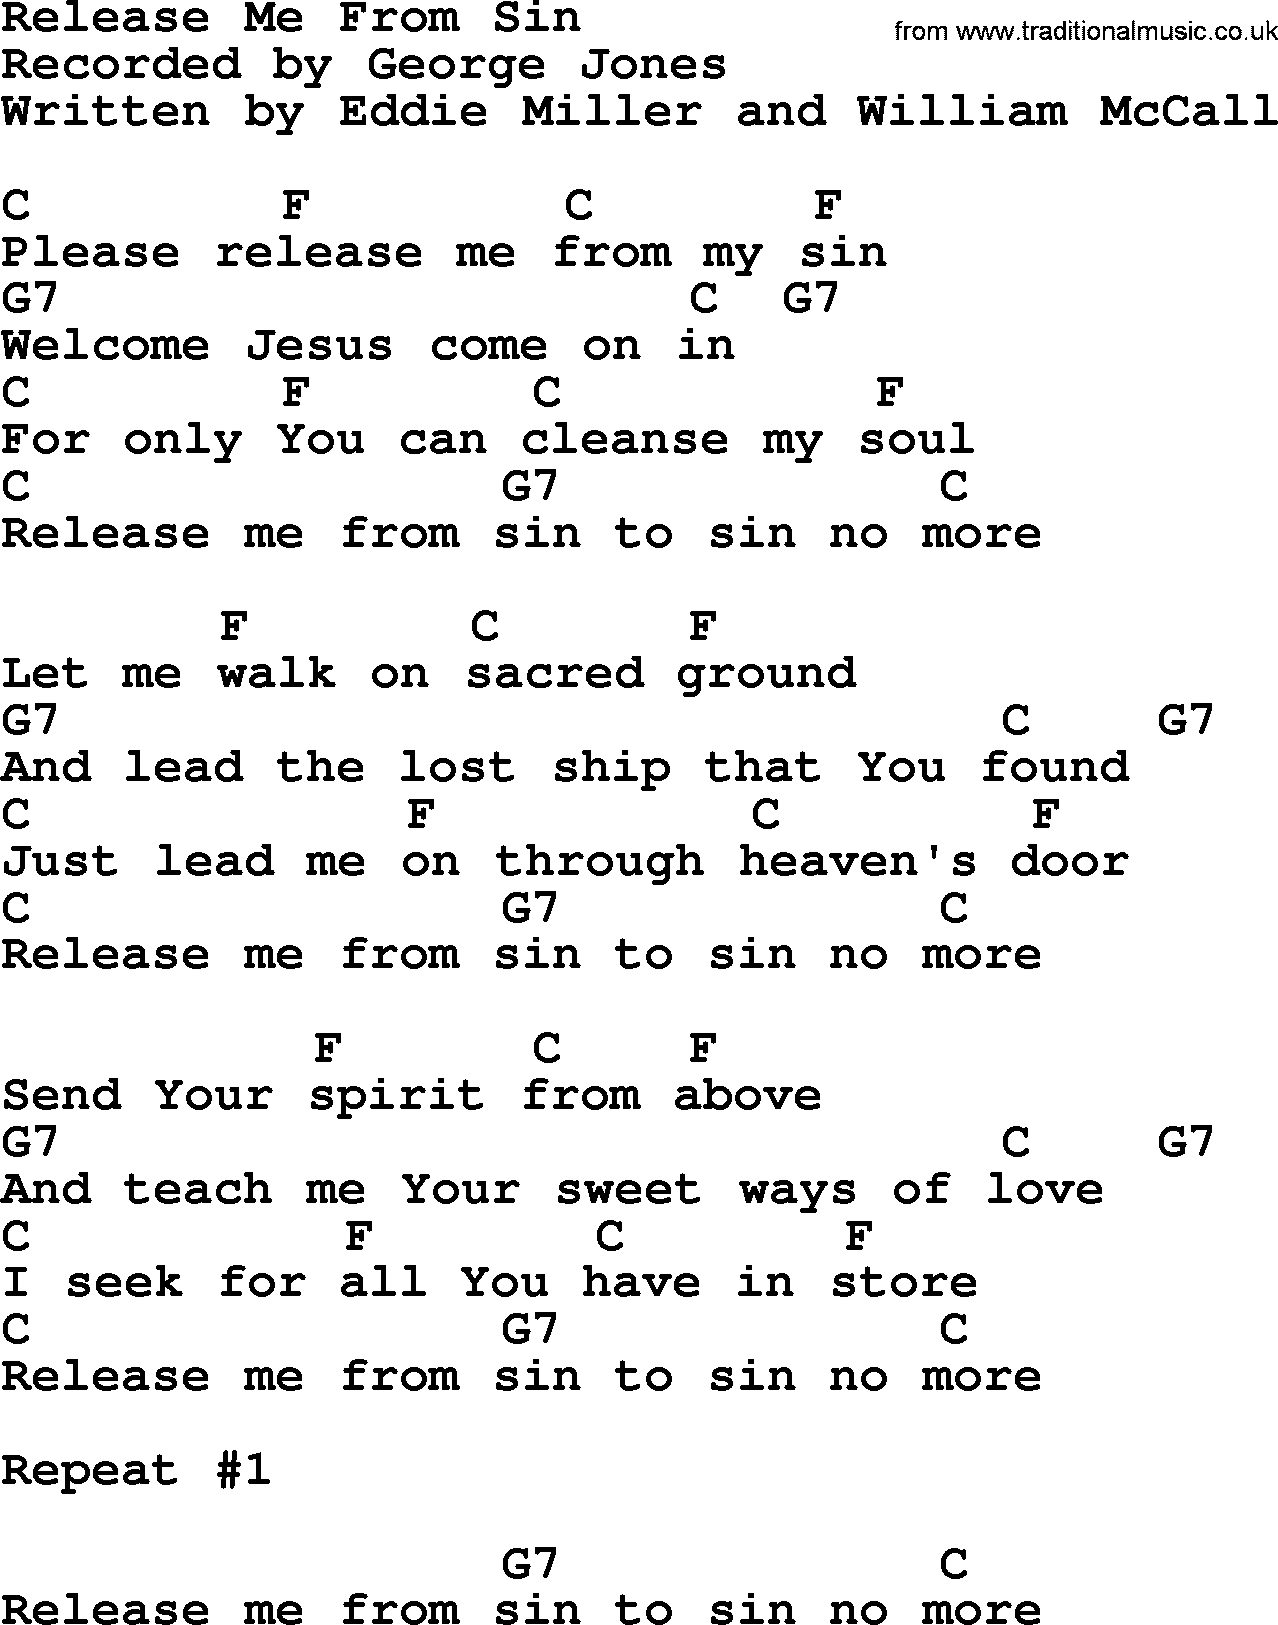 George Jones song: Release Me From Sin, lyrics and chords